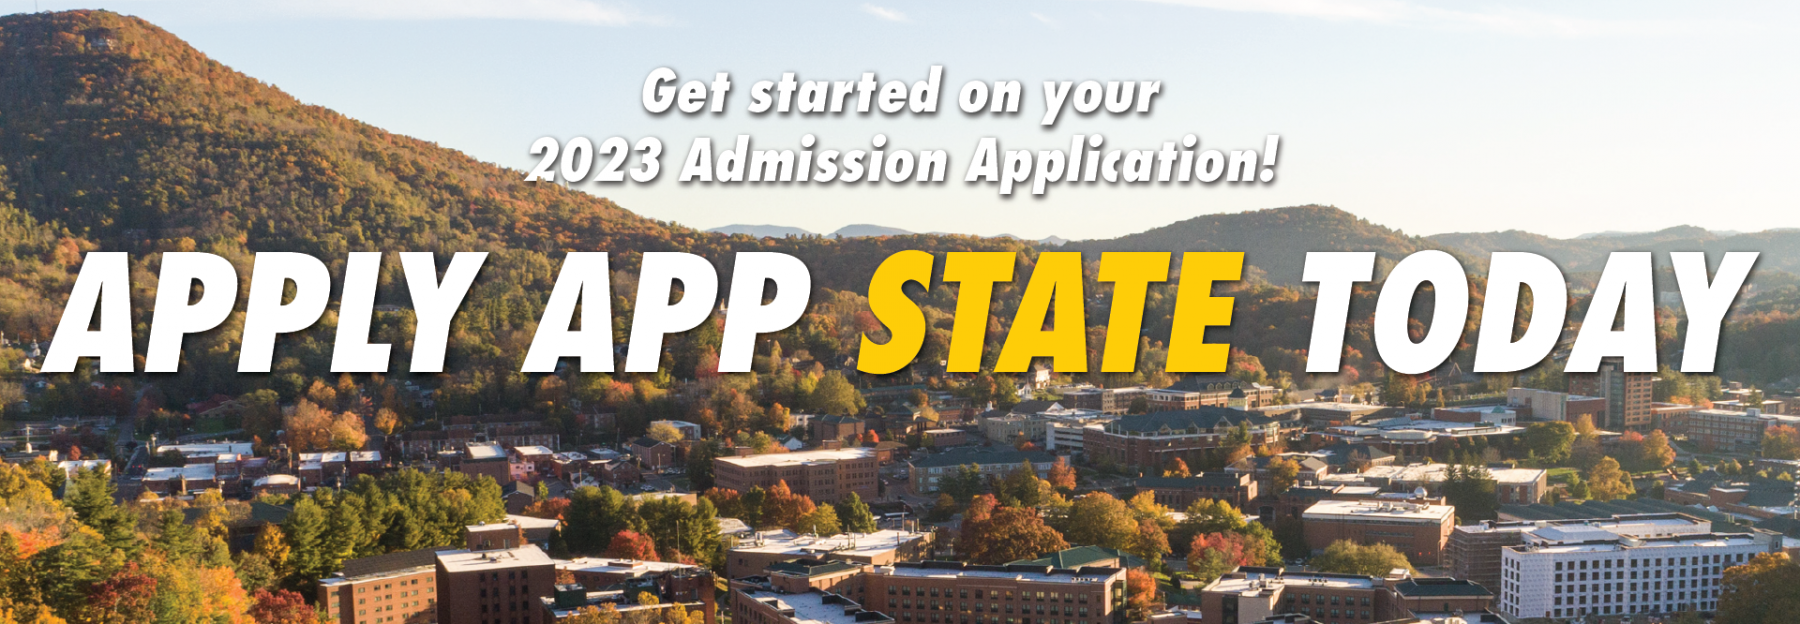 Our 2023 Admission Applications are now open!